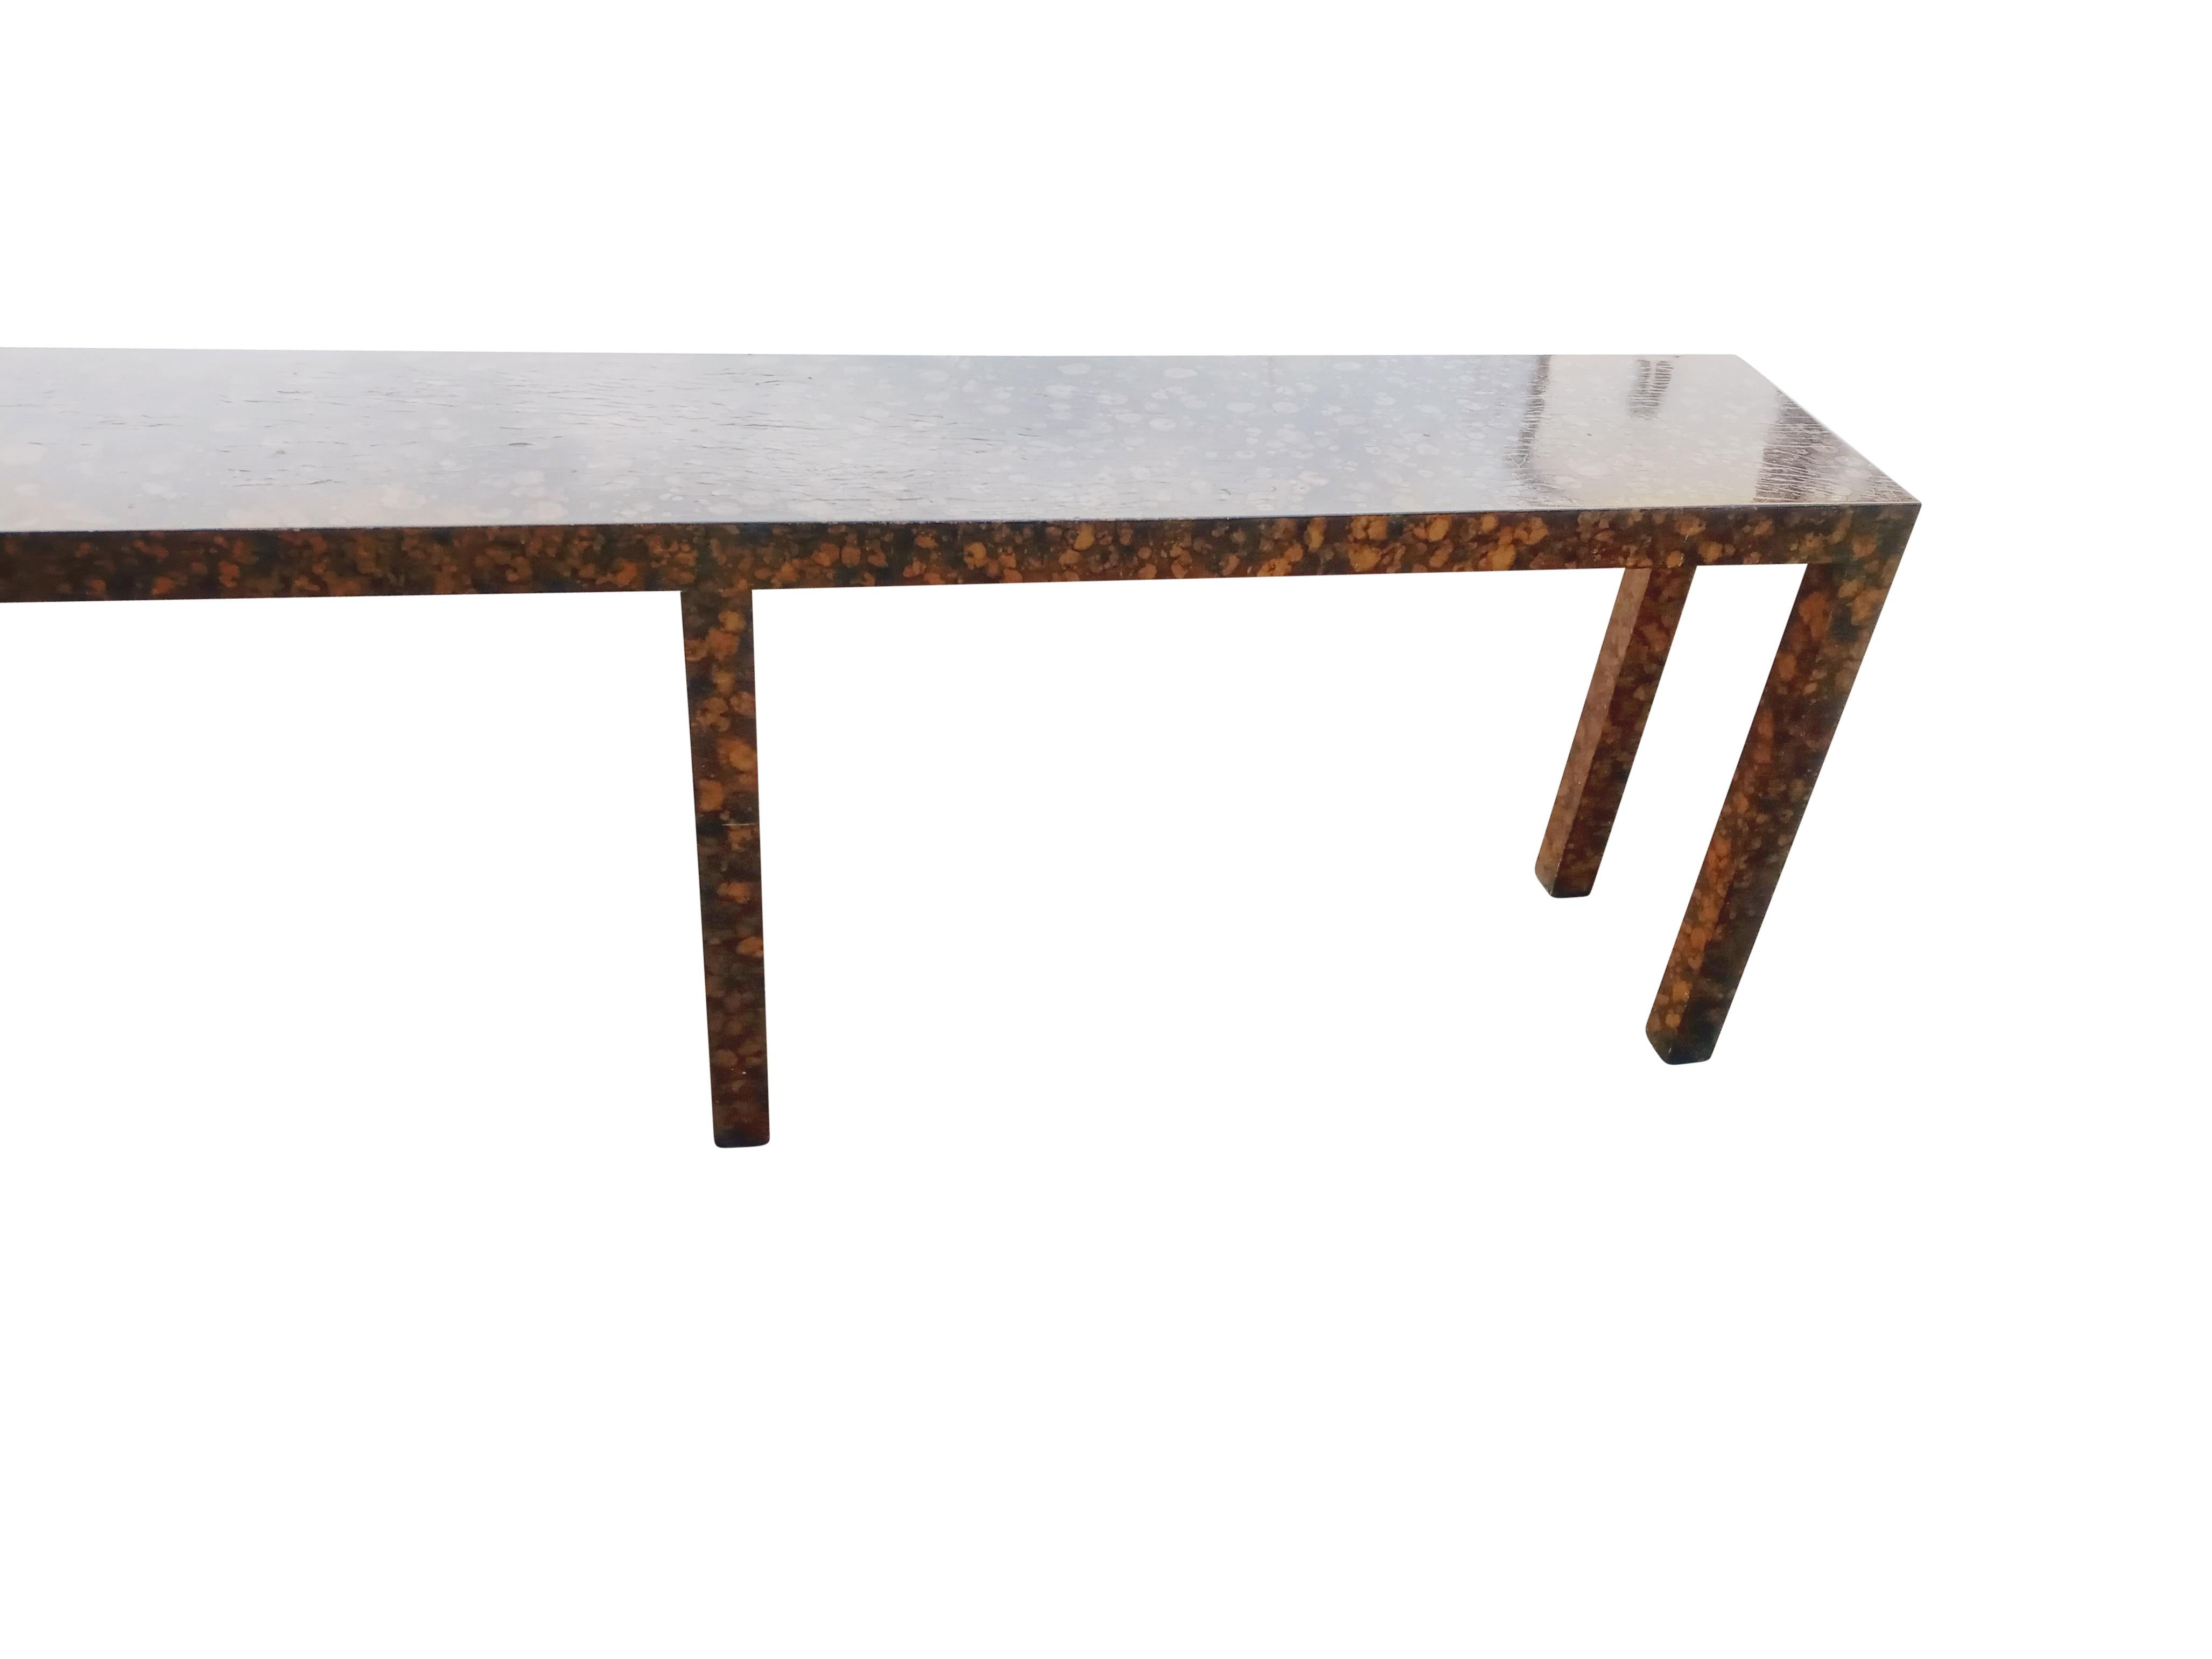 American 1970s Oil Drop Finish Tall Long Narrow Parsons Console Table by Directional